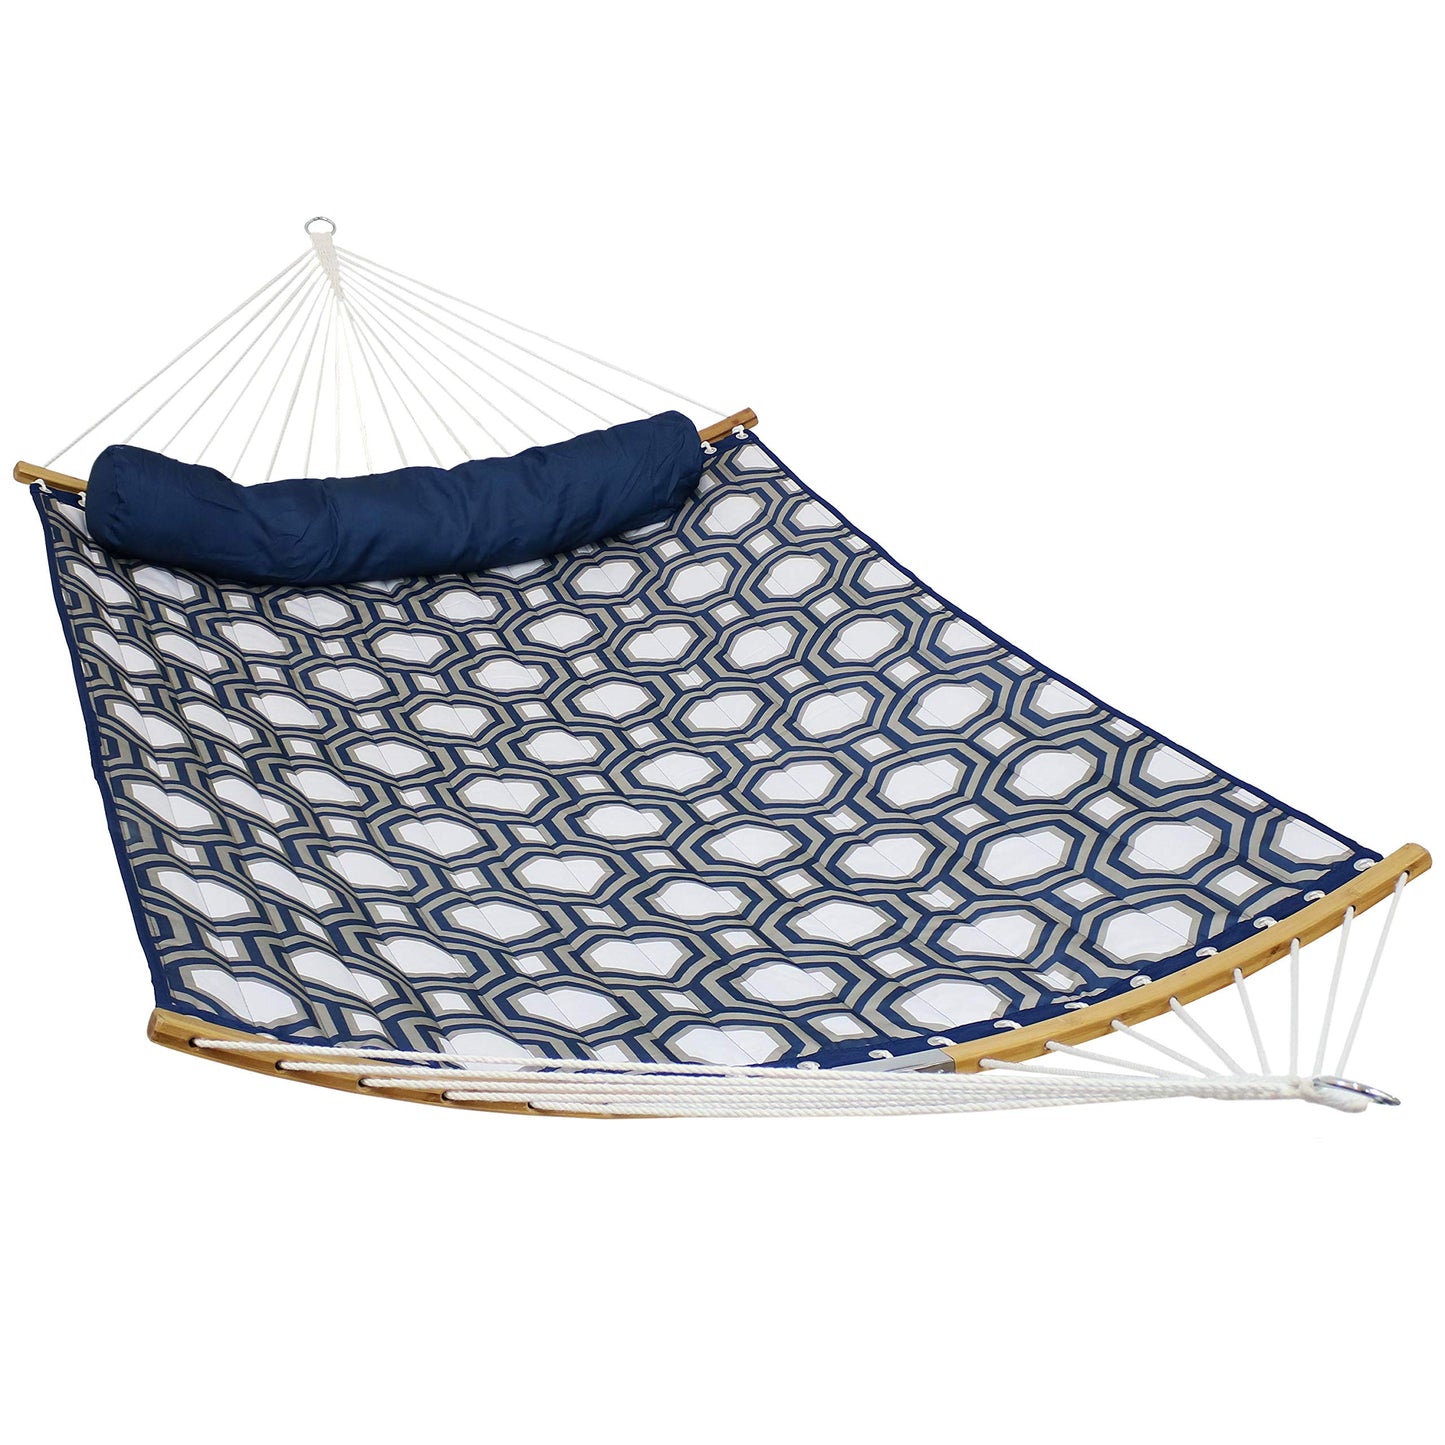 Quilted Double Hammock with 2 Curved Bamboo Spreader Bars - Sunnydaze